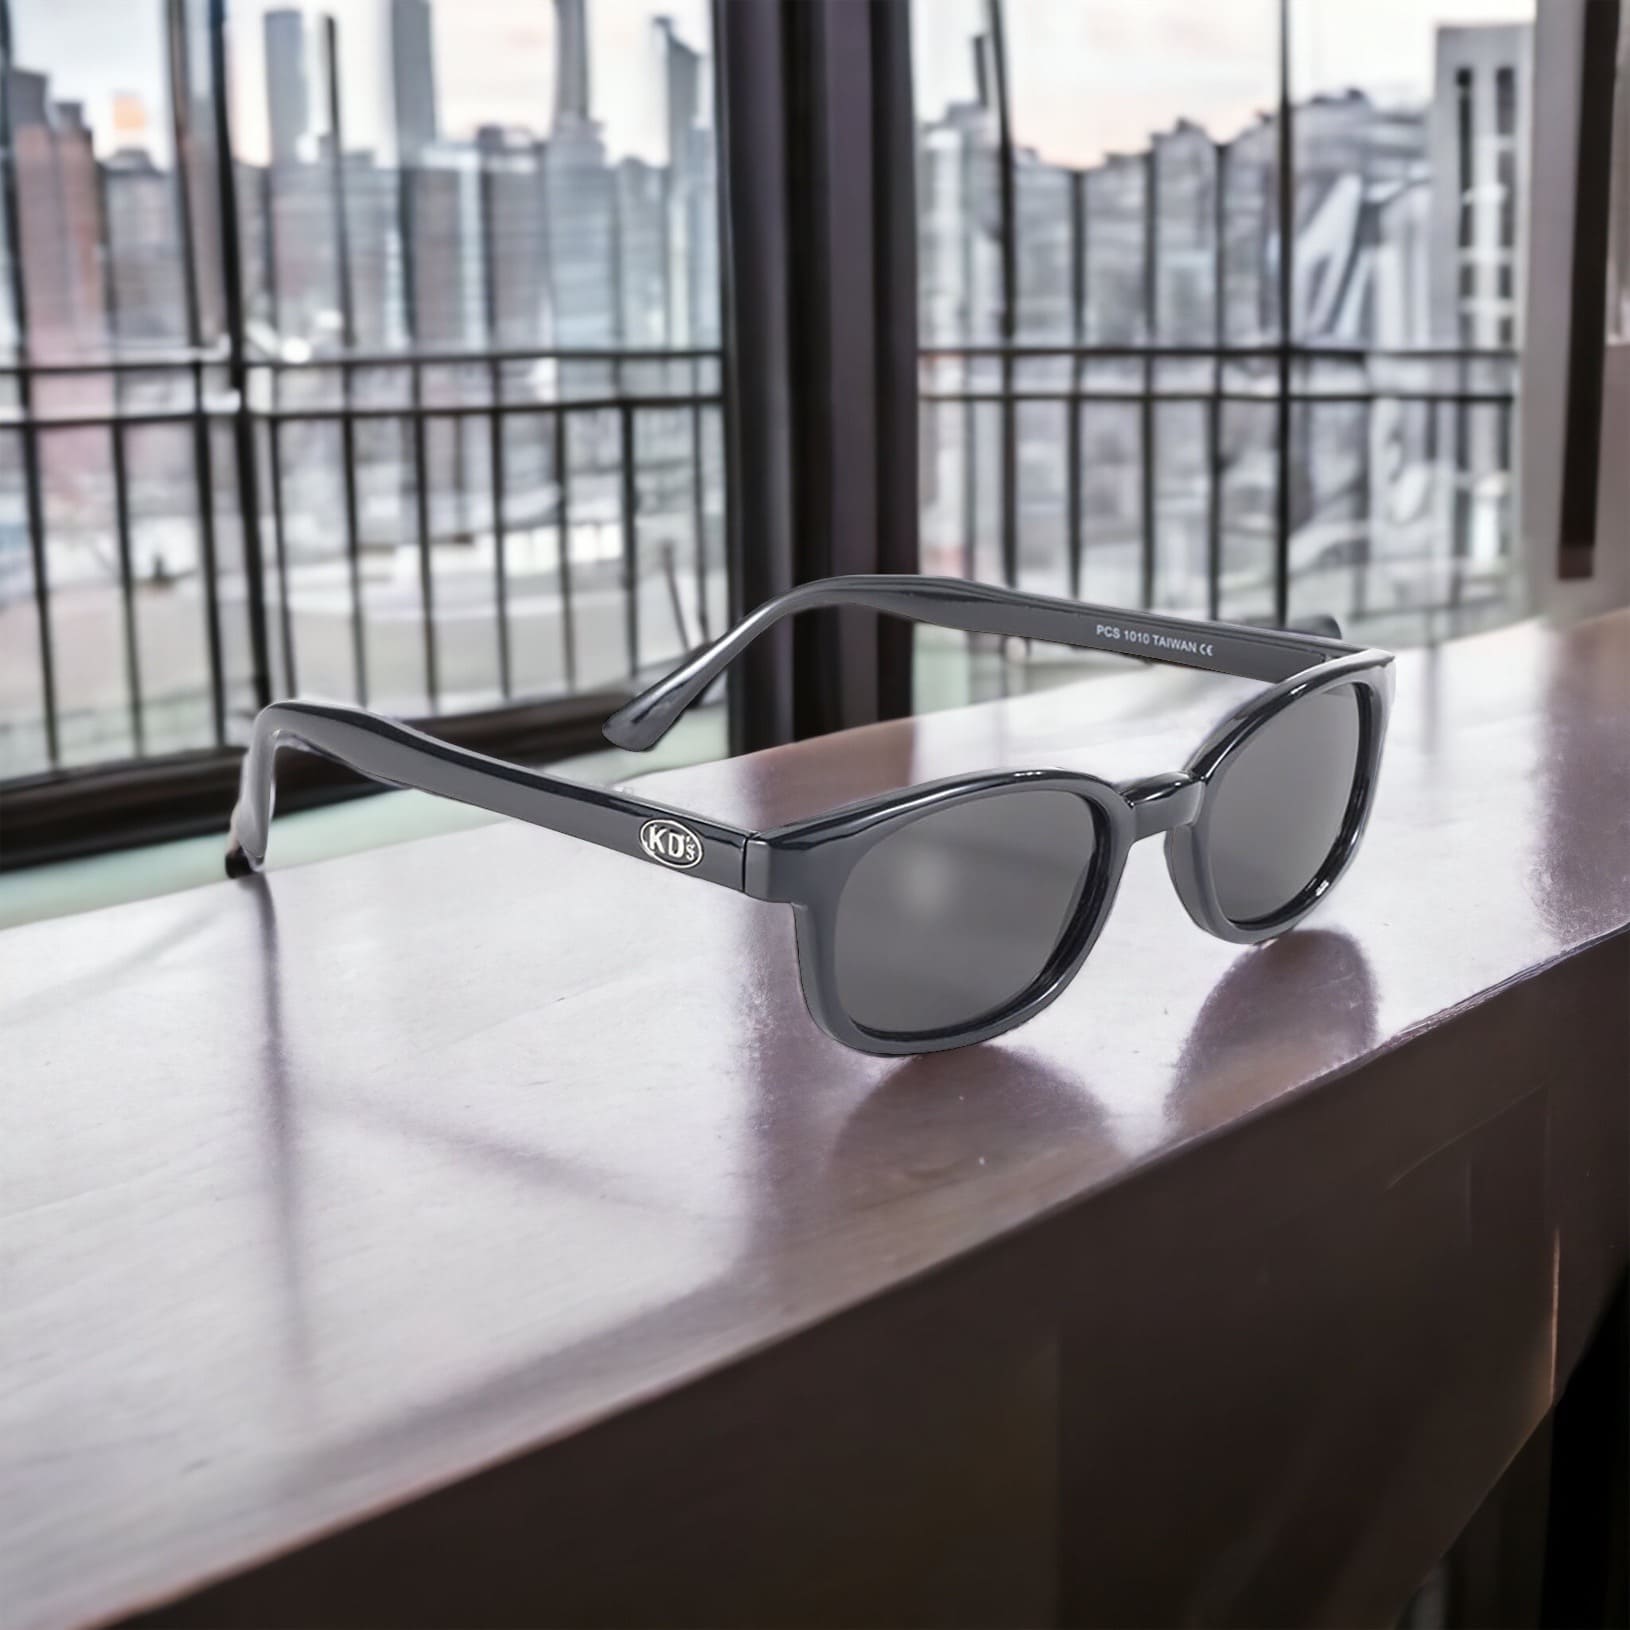 The X-KD's 1010 sunglasses worn by Jax Teller in Sons of Anarchy with an elegant black frame and smoked lenses. Placed on a window with a view of New York